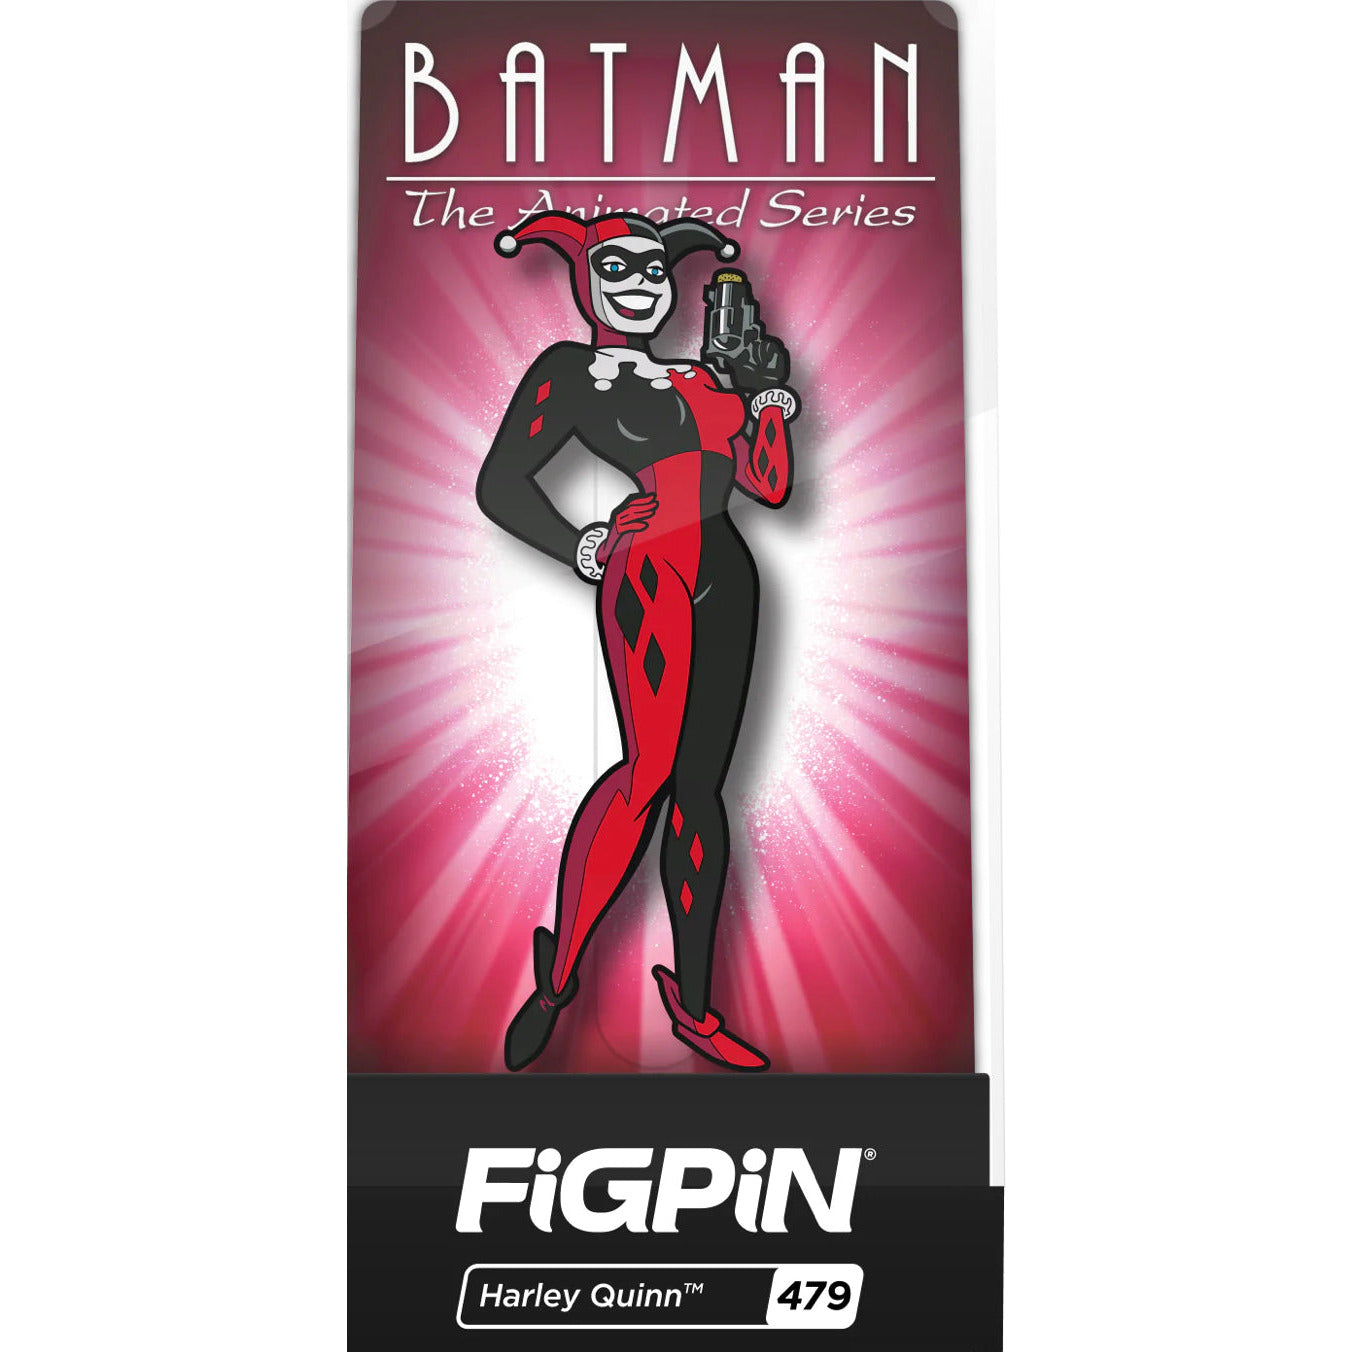 FIGPIN BATMAN THE ANIMATED SERIES HARLEY QUINN 479 RETIRED 1 OF 1500 IN STOCK - Plastic Empire